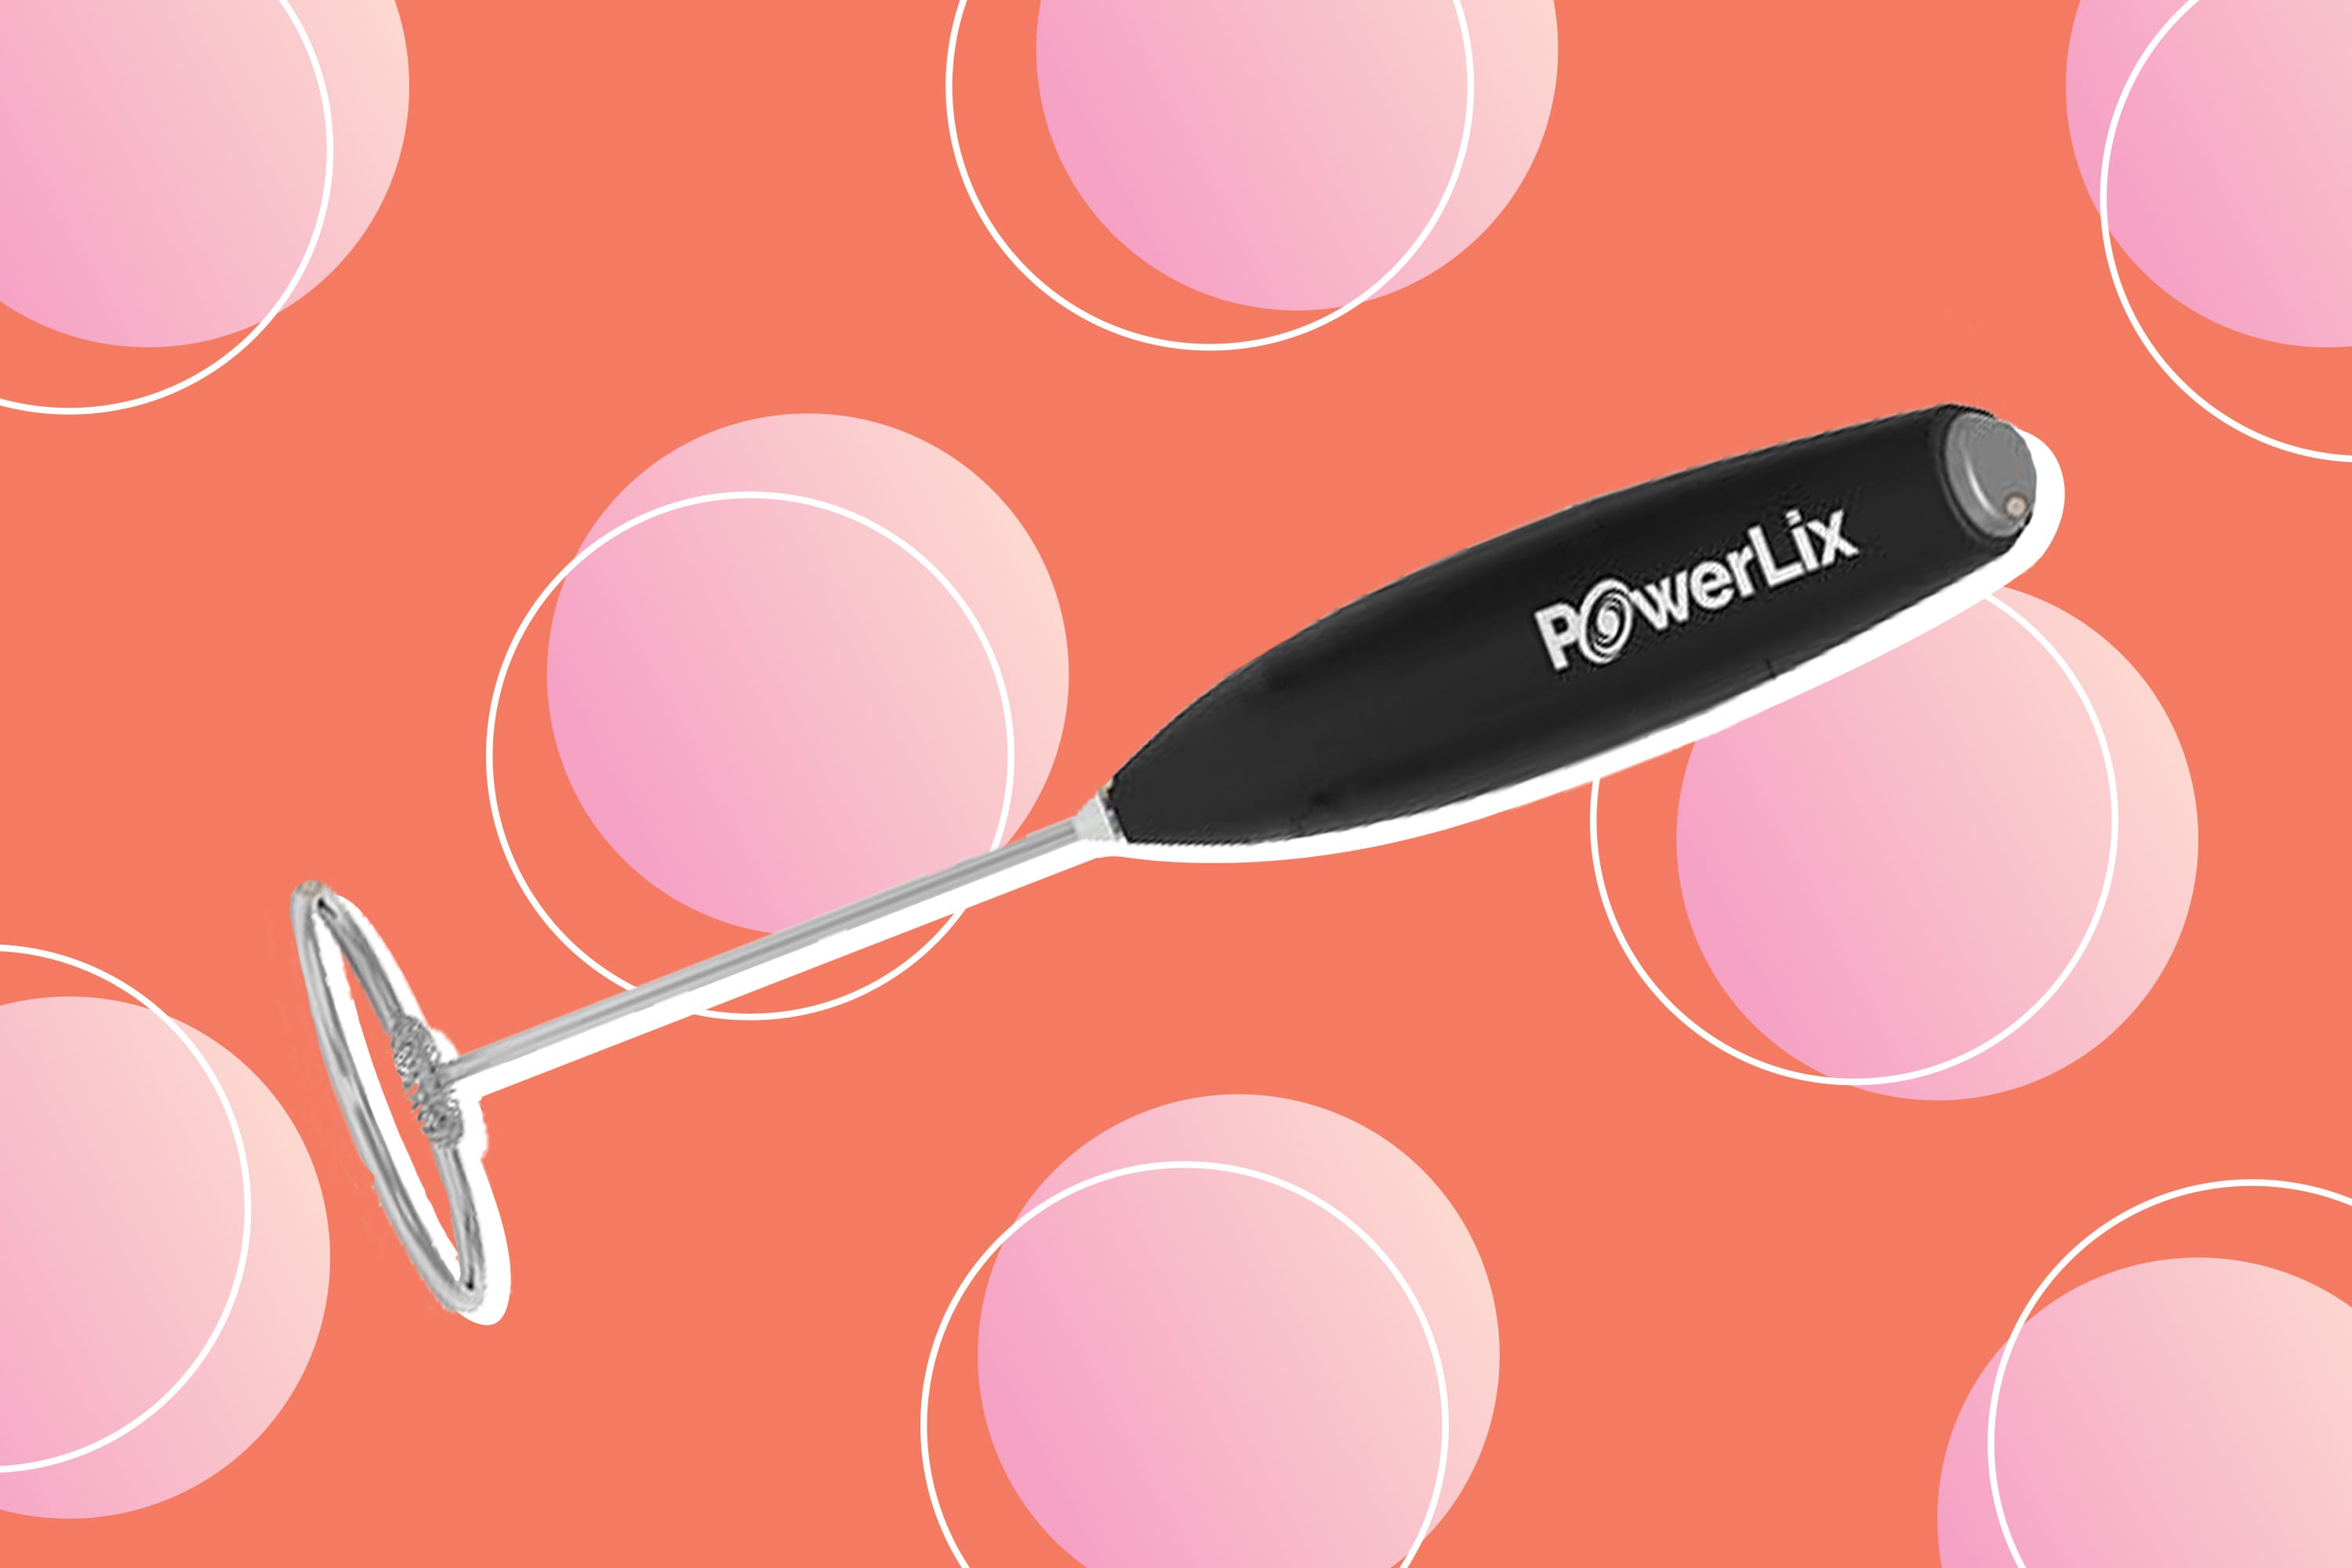 The PowerLix Milk Frother Pro, Reviewed for Performance